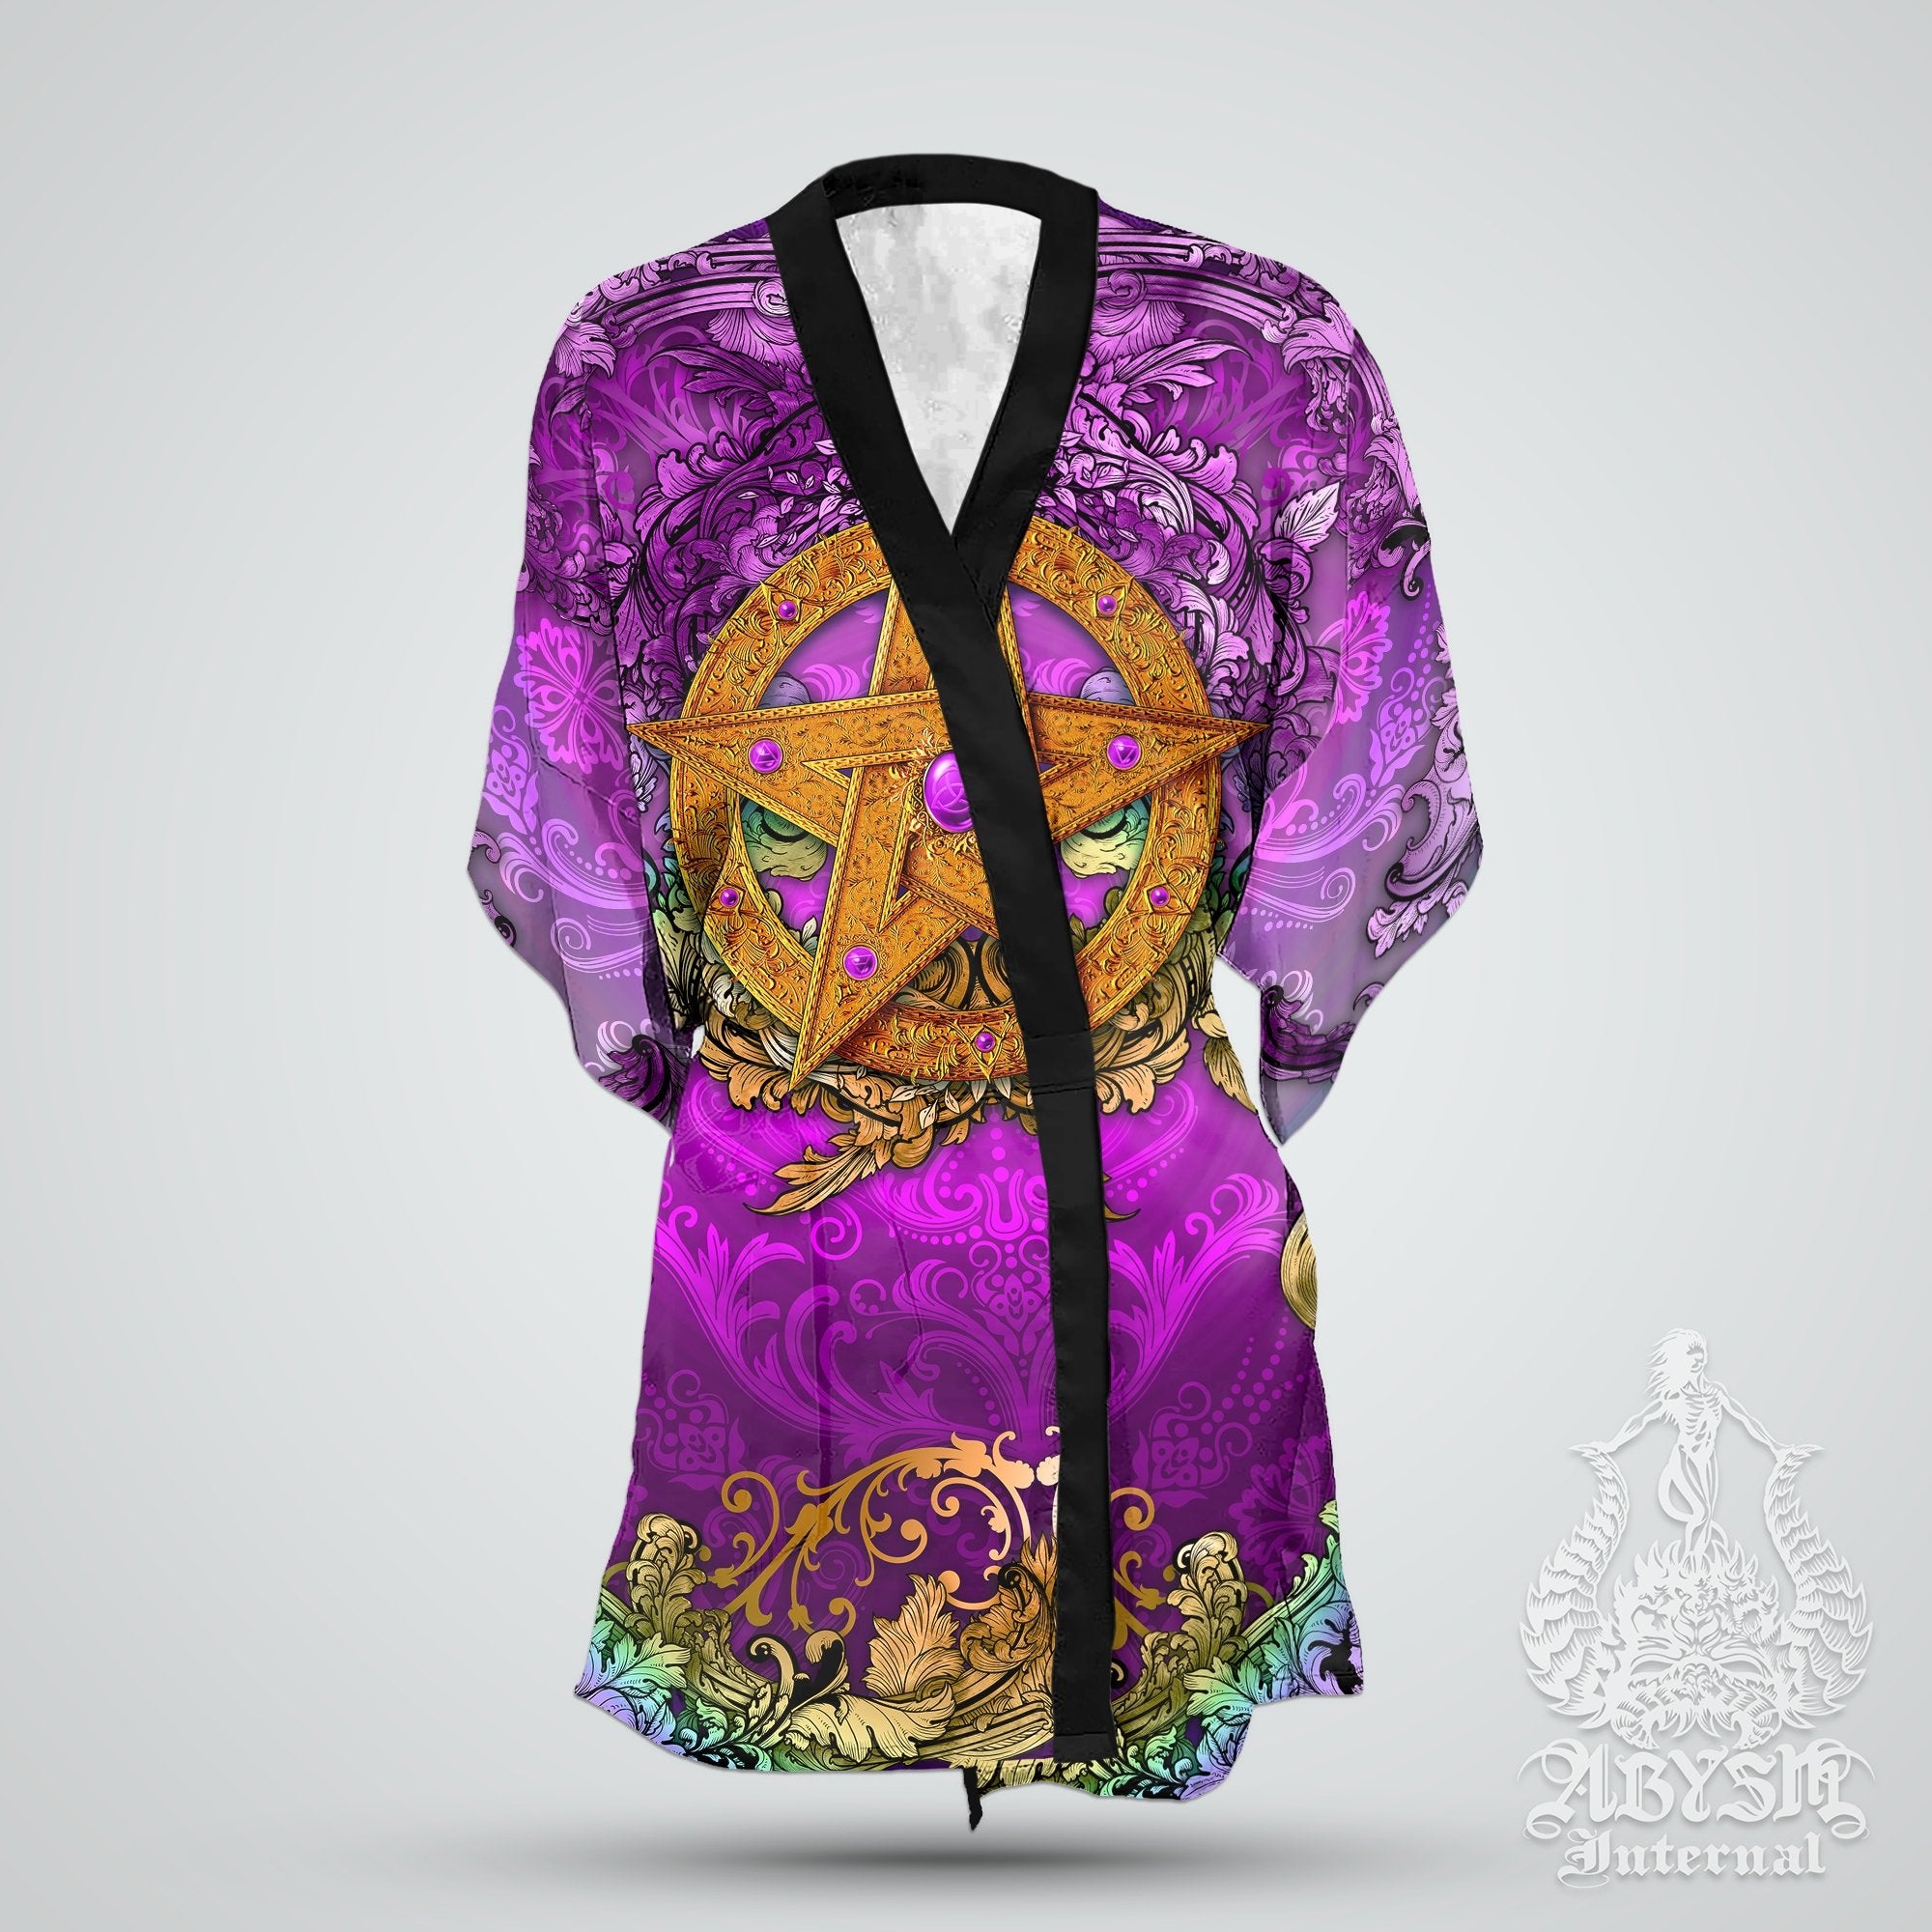 Pentacle Cover Up, Beach Outfit, Witch Party Kimono, Wicca Summer Festival Robe, Witchy Indie and Alternative Clothing, Unisex - Purple - Abysm Internal